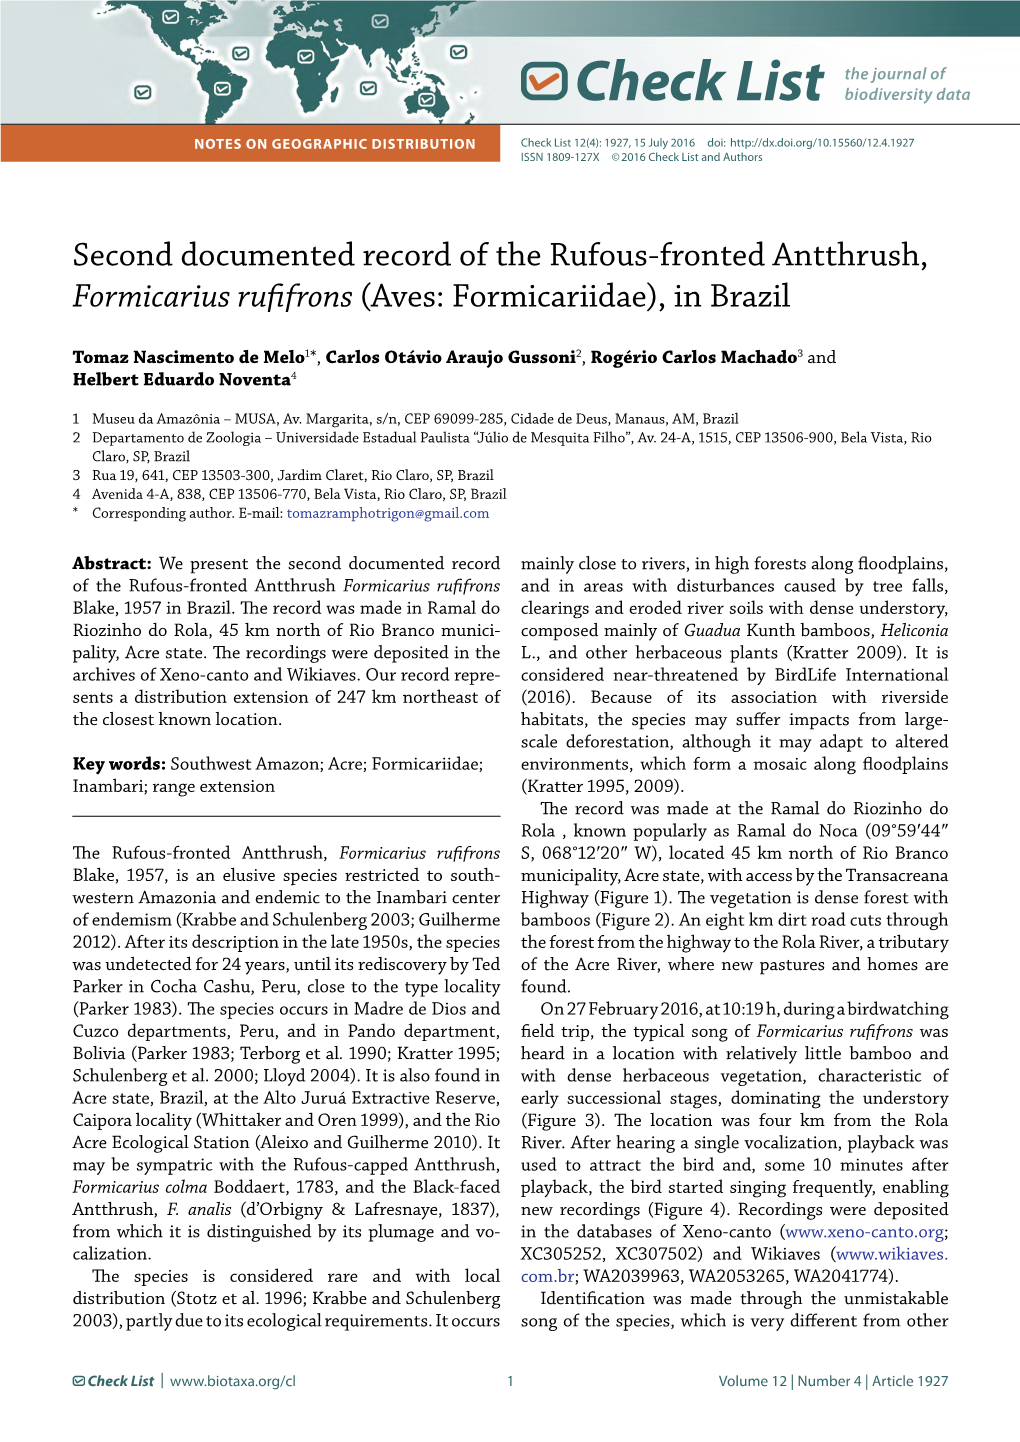 Second Documented Record of the Rufous-Fronted Antthrush, Formicarius Rufifrons (Aves: Formicariidae), in Brazil